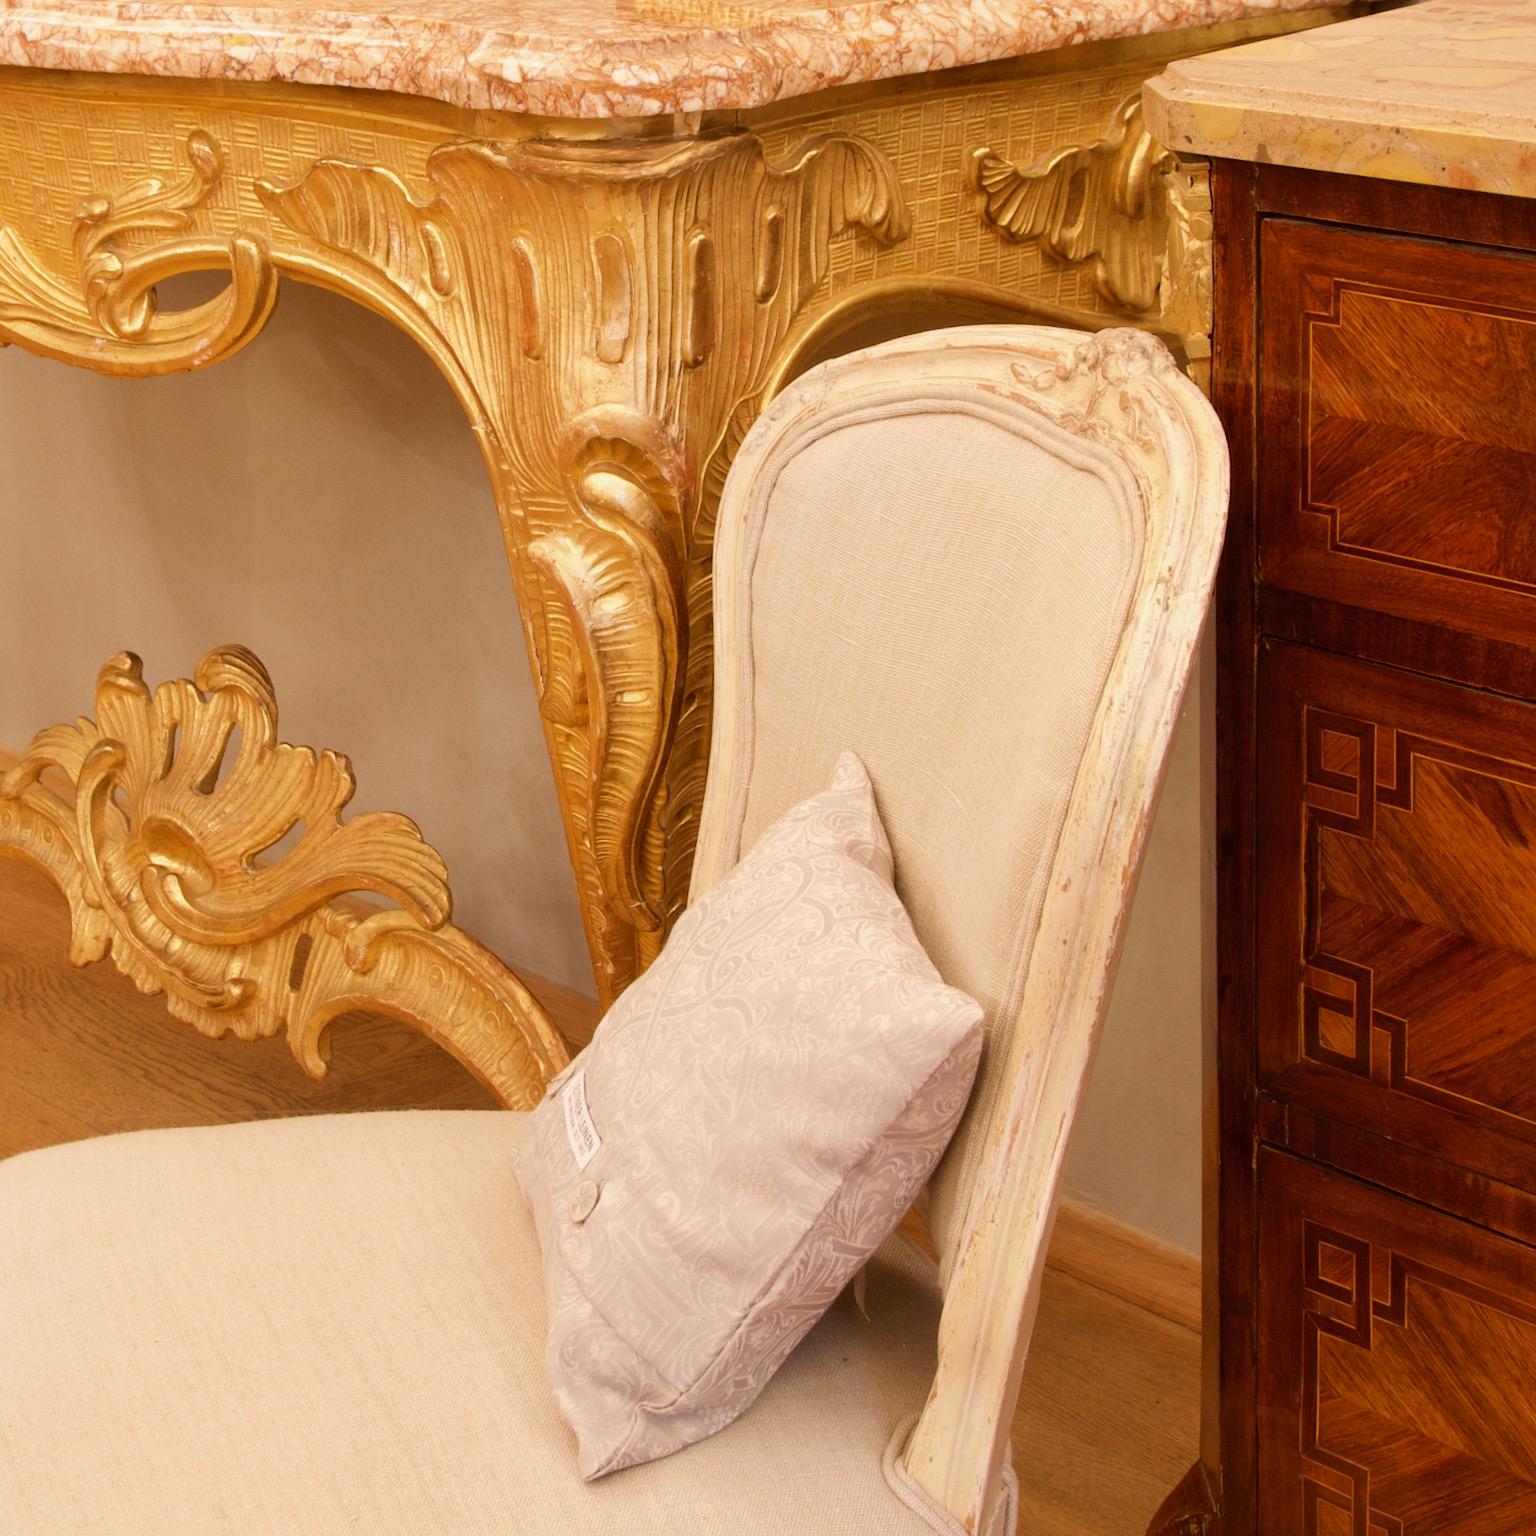 Mid-18th Century French Regence/Louis XV Carved Gilt Wood Rocaille Console Table

Large, impressive French Régence or early Louis XV console table of finely carved and gilded wood with the original yellow and red marble top of serpentine outline.